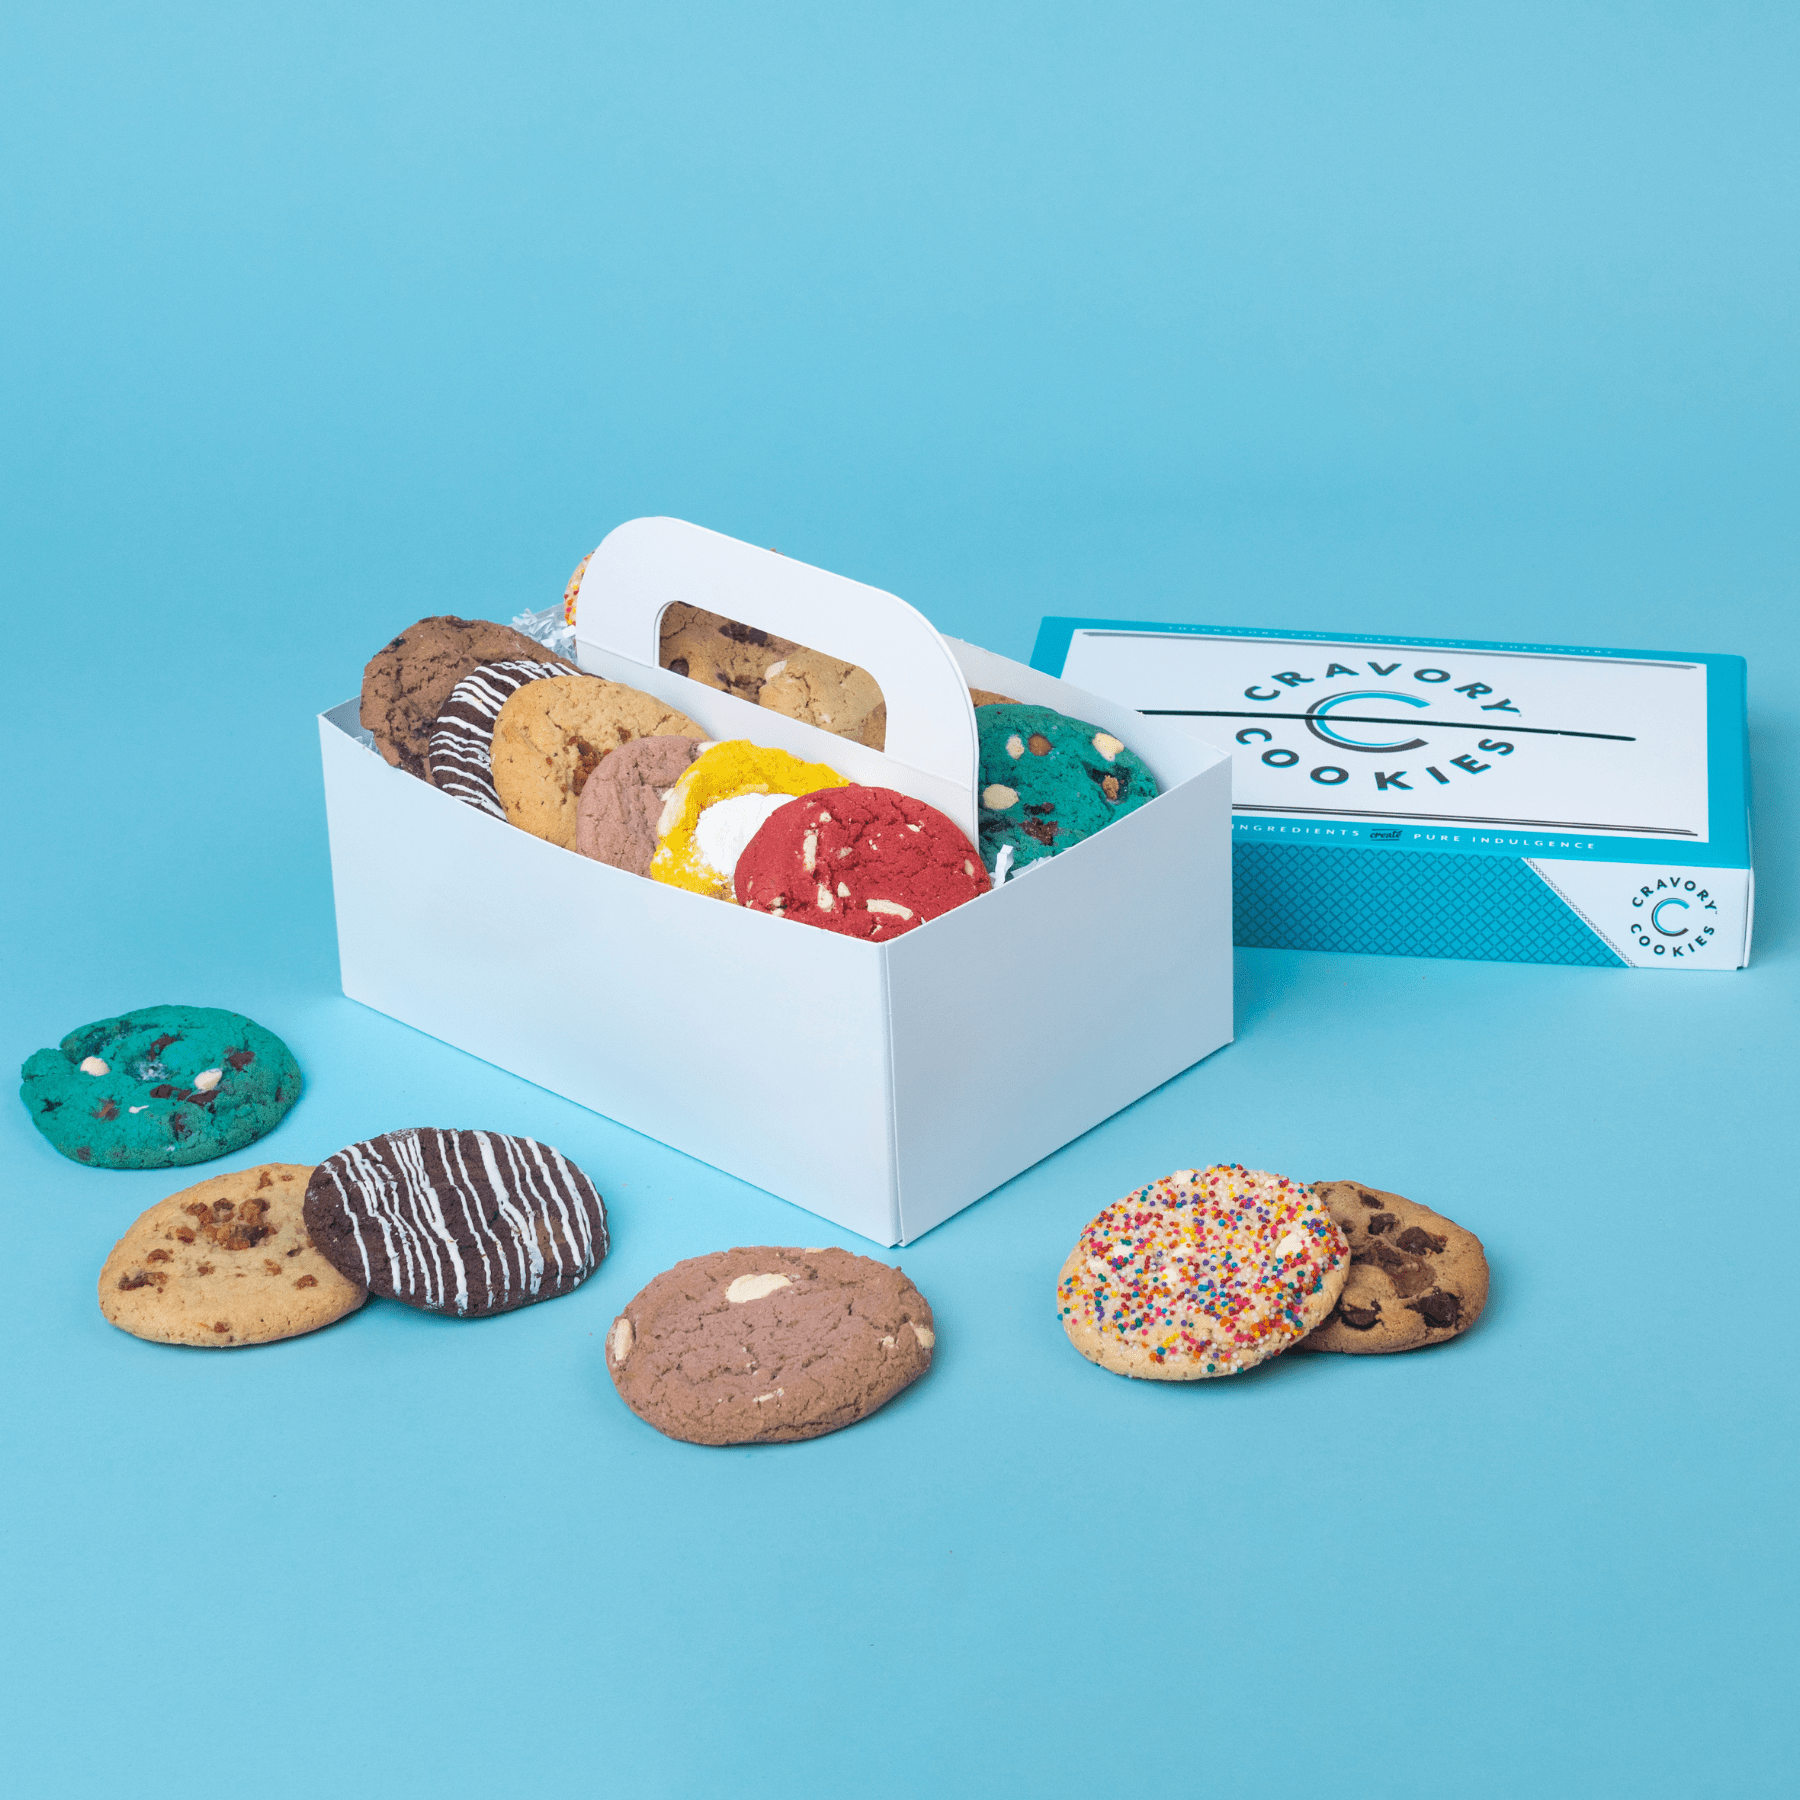 Assorted cookies in box